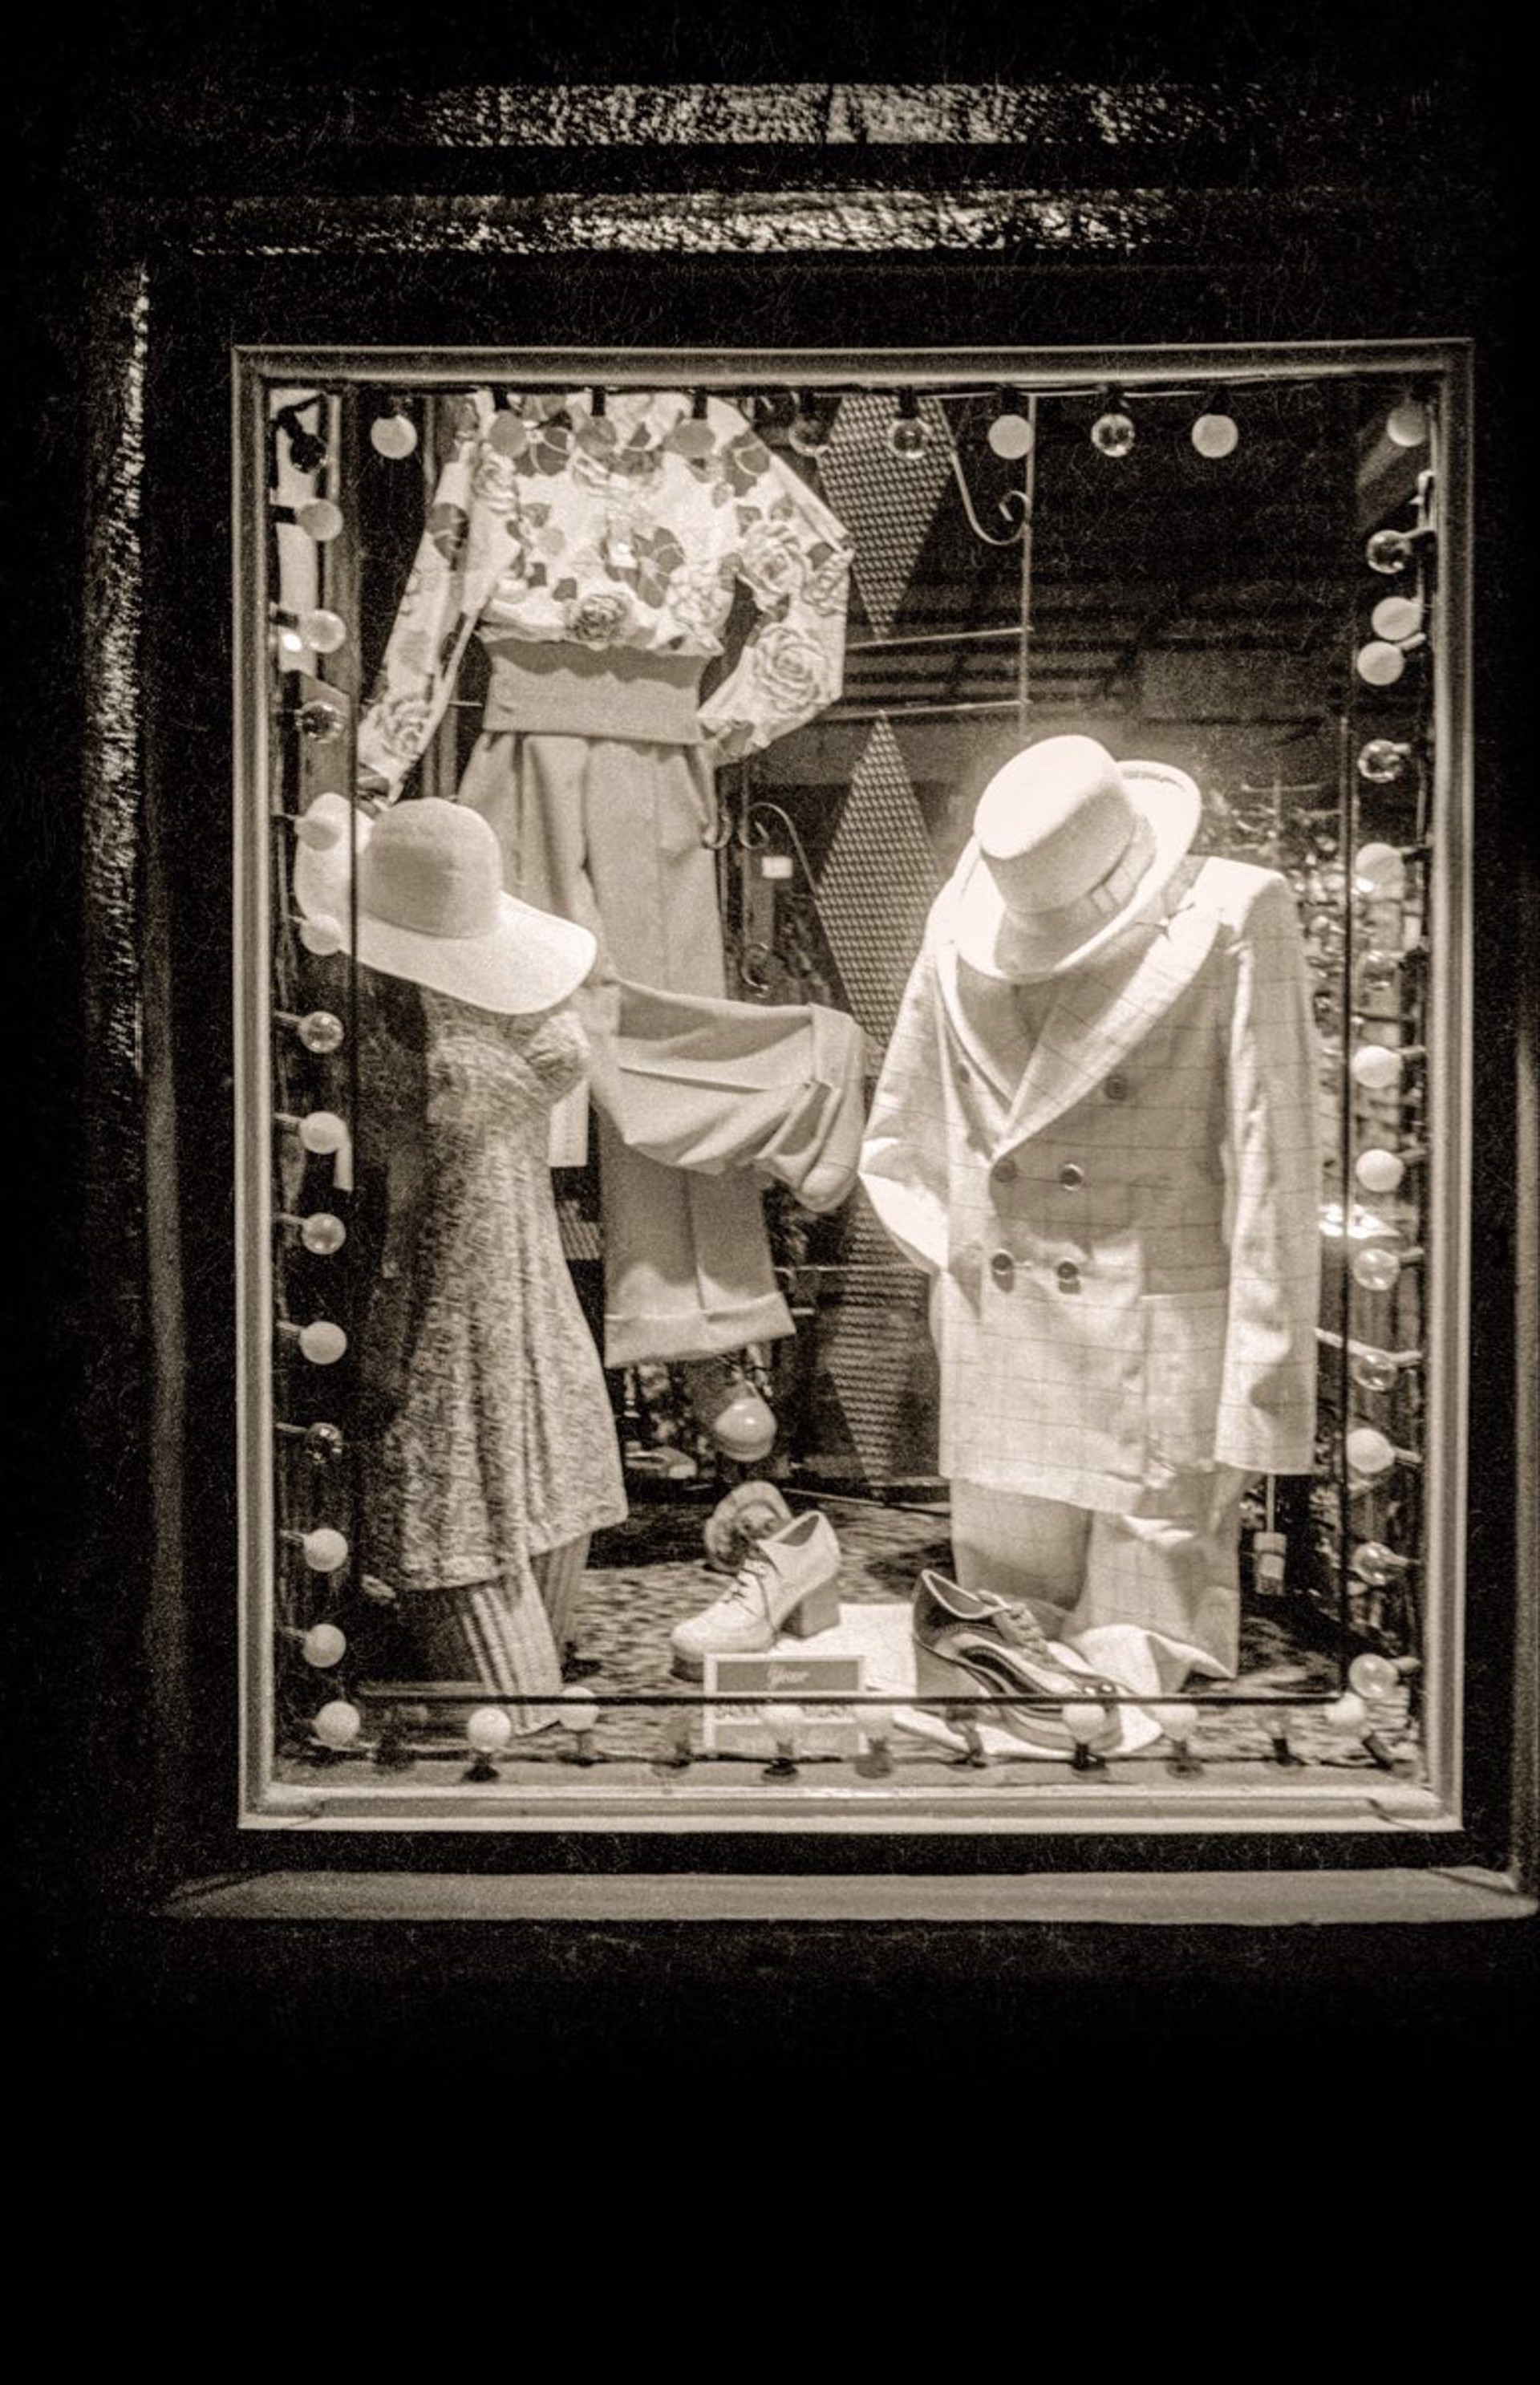 Mannequins at Night by Jack Dempsey